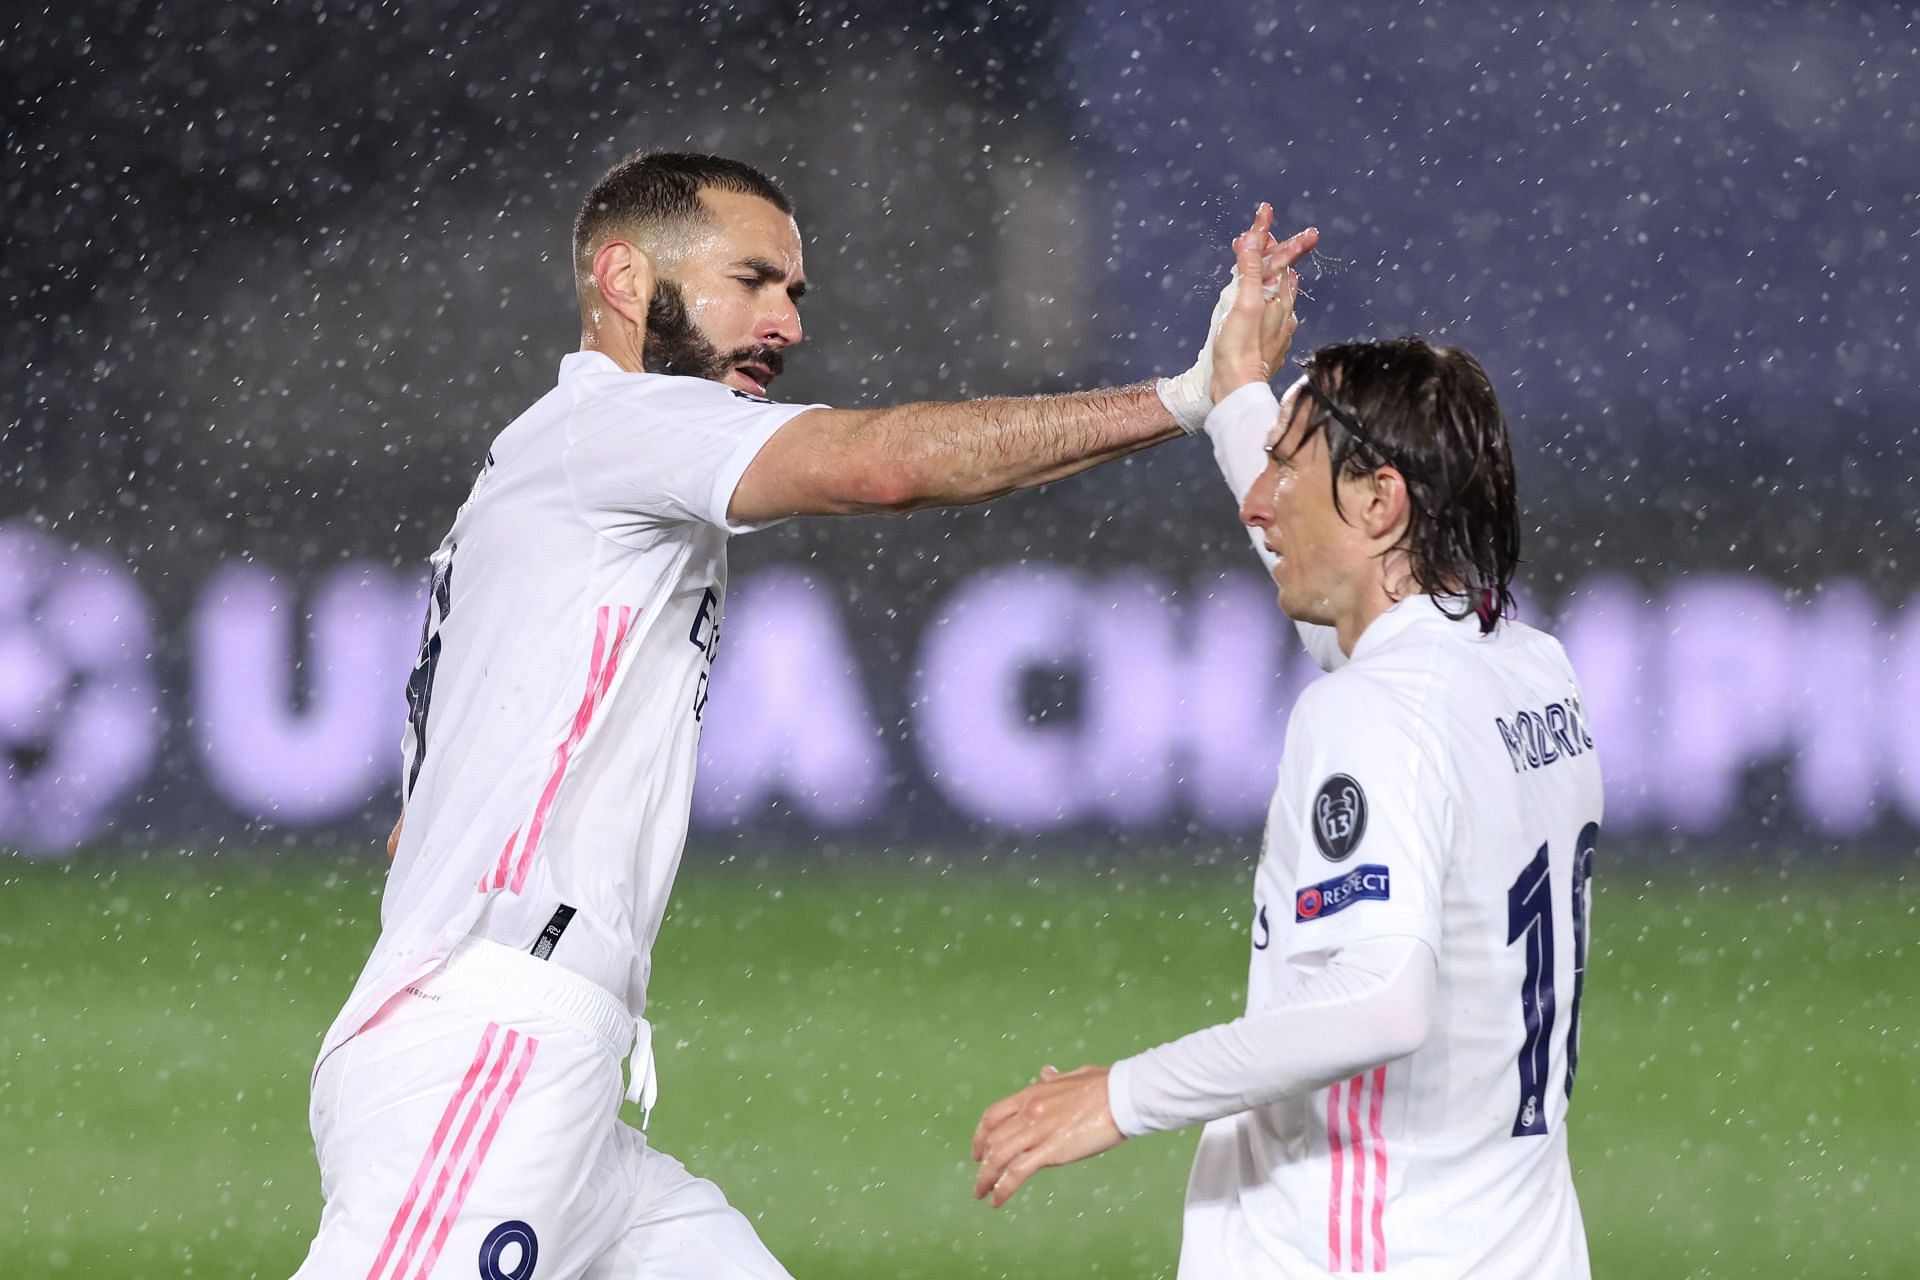 Karim Benzema (left) and Luka Modric (right) continue to blow opponents away.